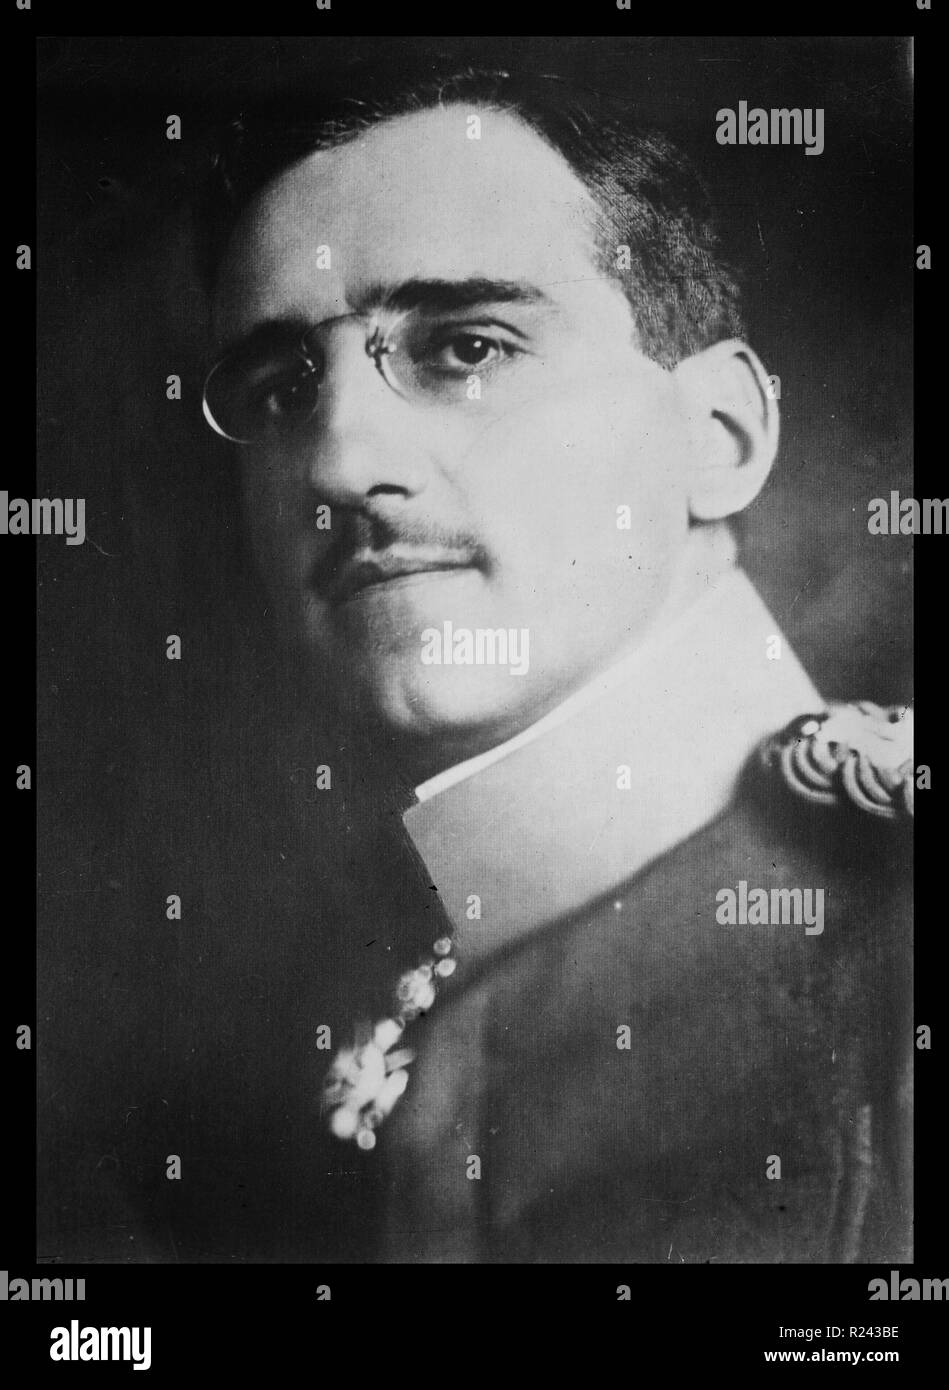 Alexander I (1888-1934) served as a prince regent of the Kingdom of Serbia from 1914 and later became King of Yugoslavia from 1921 to 1934. Stock Photo